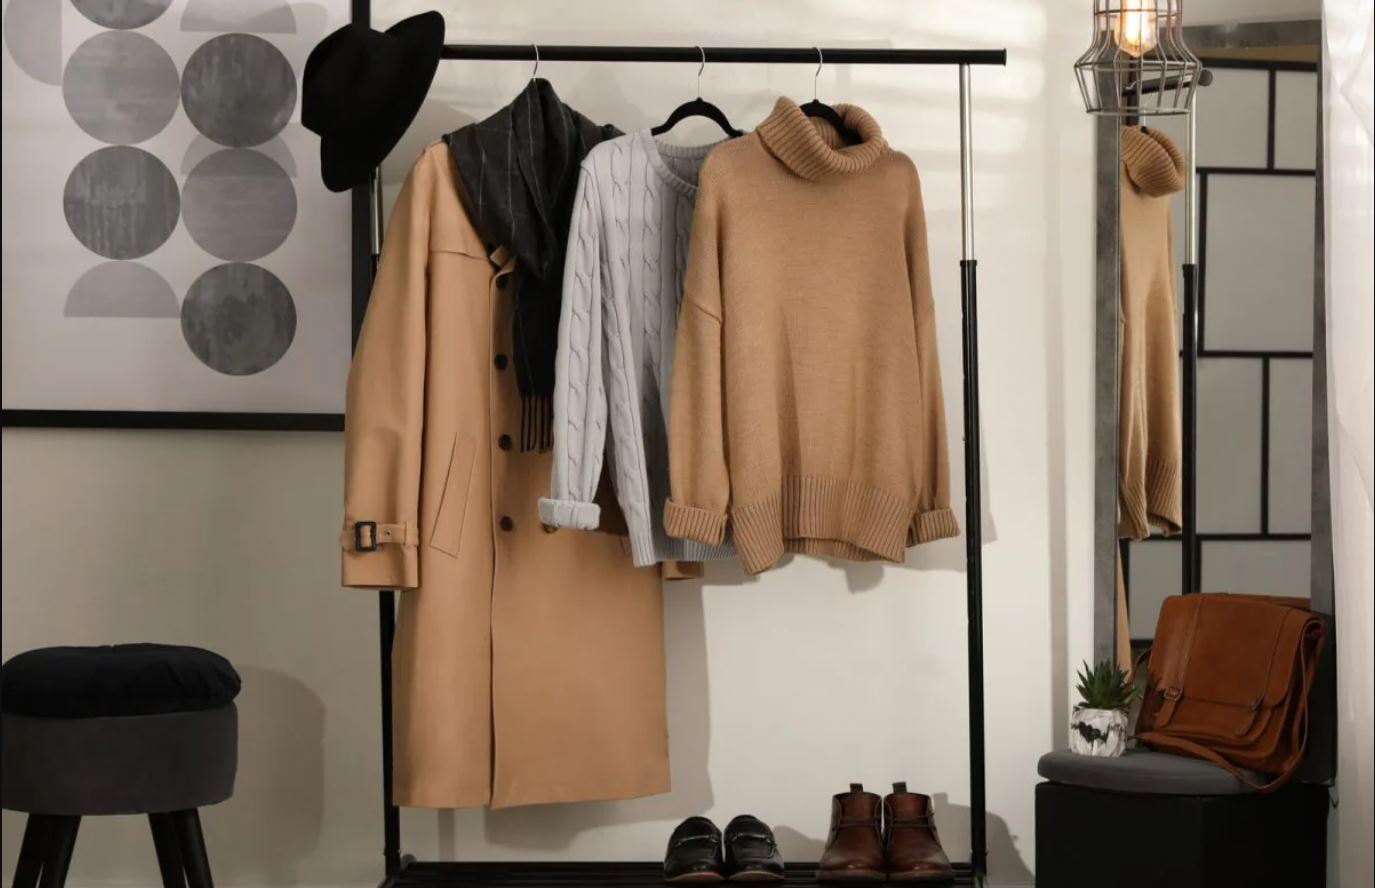 Information to making a winter capsule wardrobe with 5 outfits